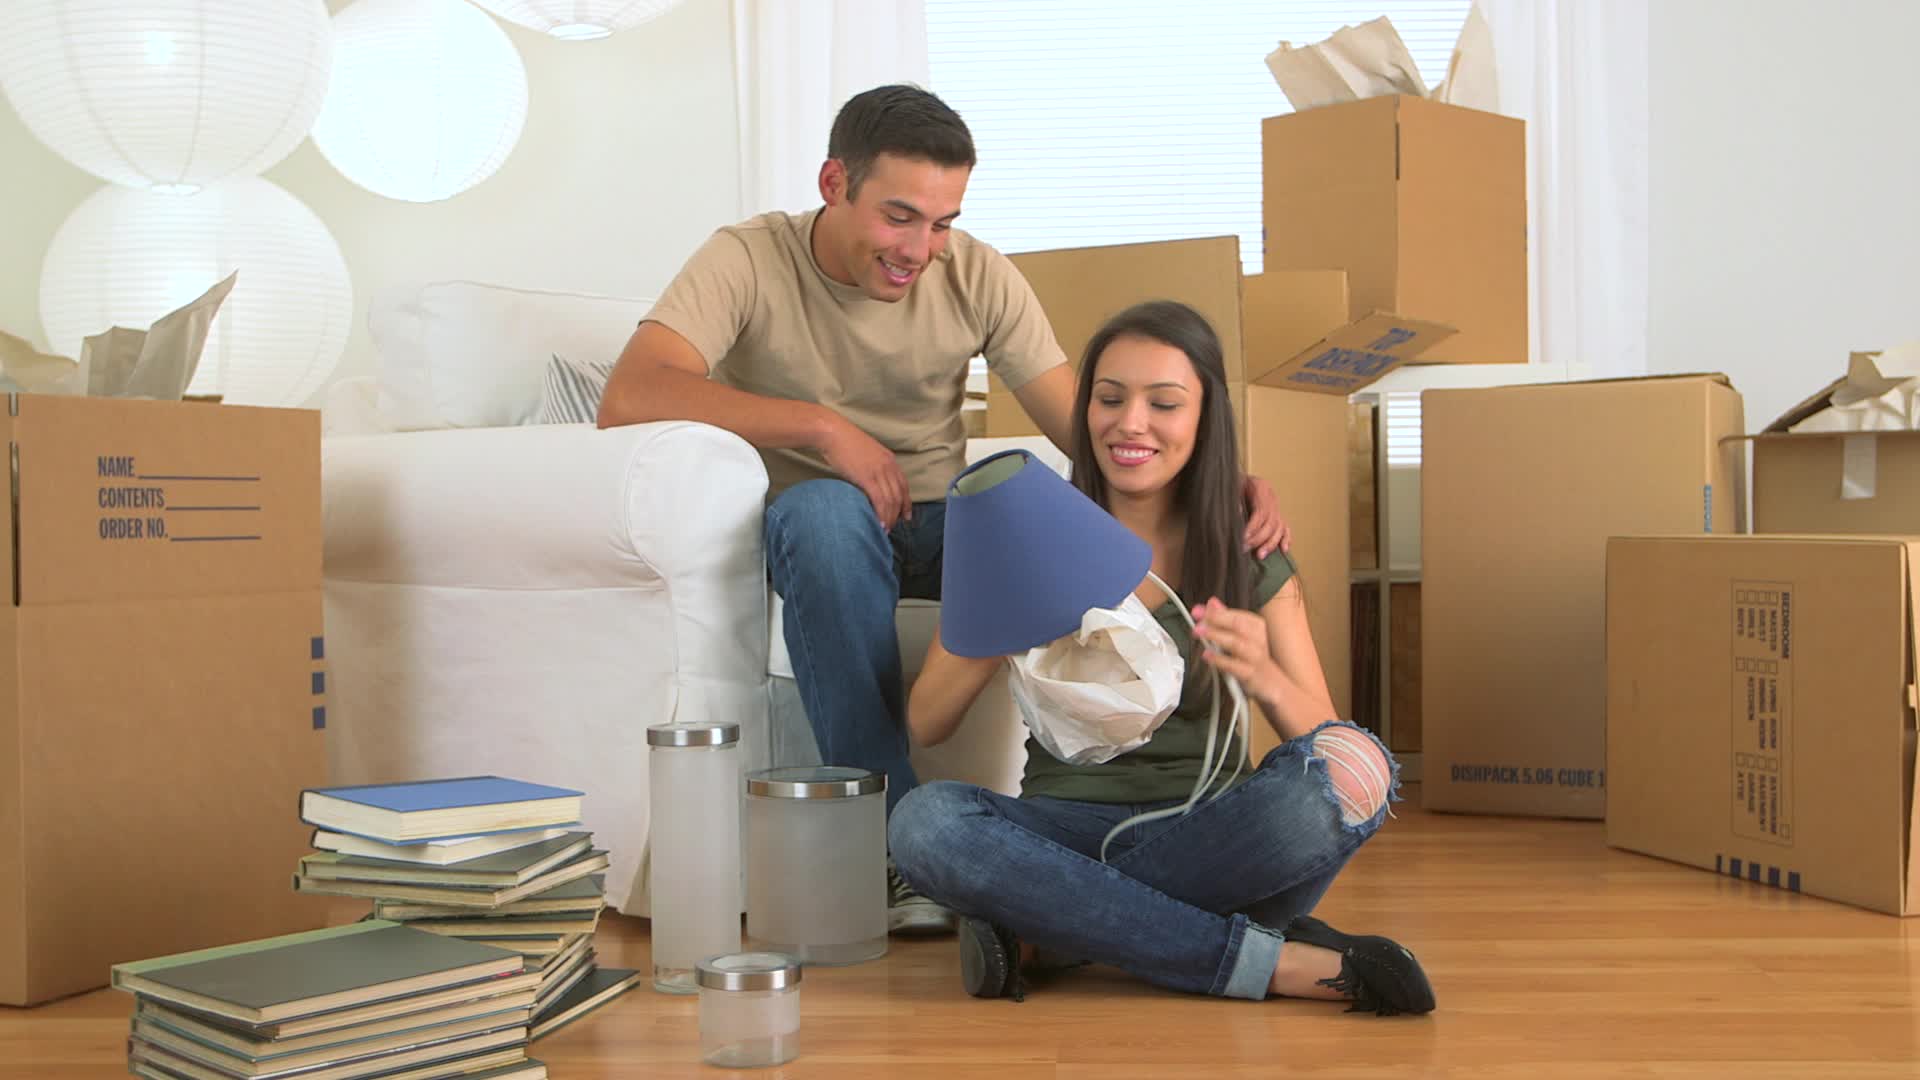 Villa Movers and Packers in Sharjah